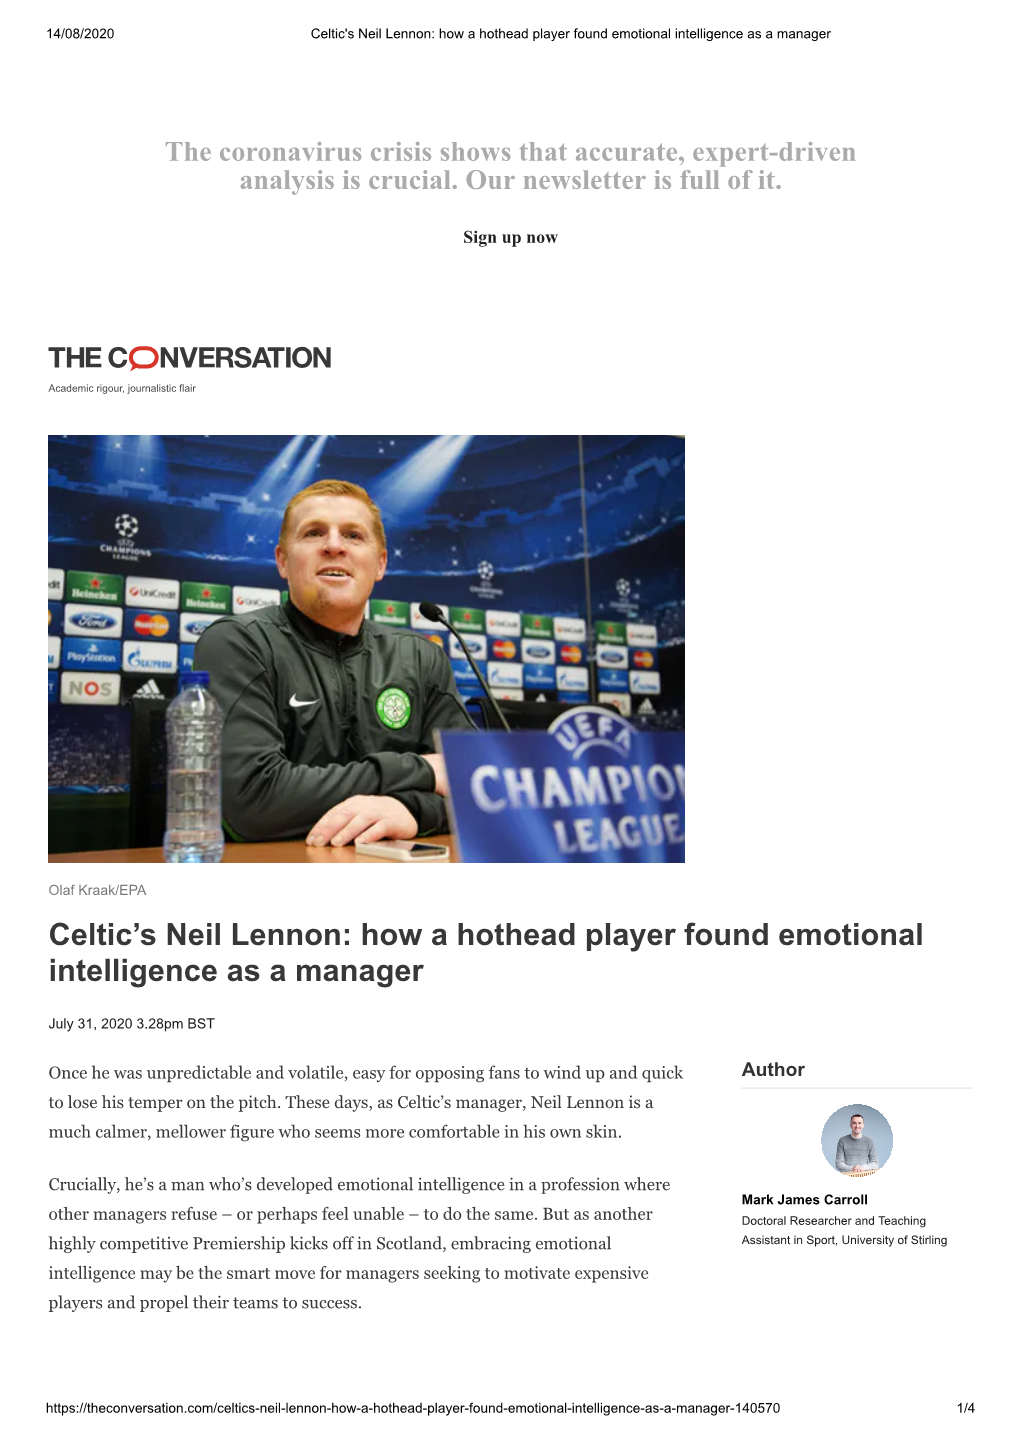 Celtic's Neil Lennon: How a Hothead Player Found Emotional Intelligence As a Manager